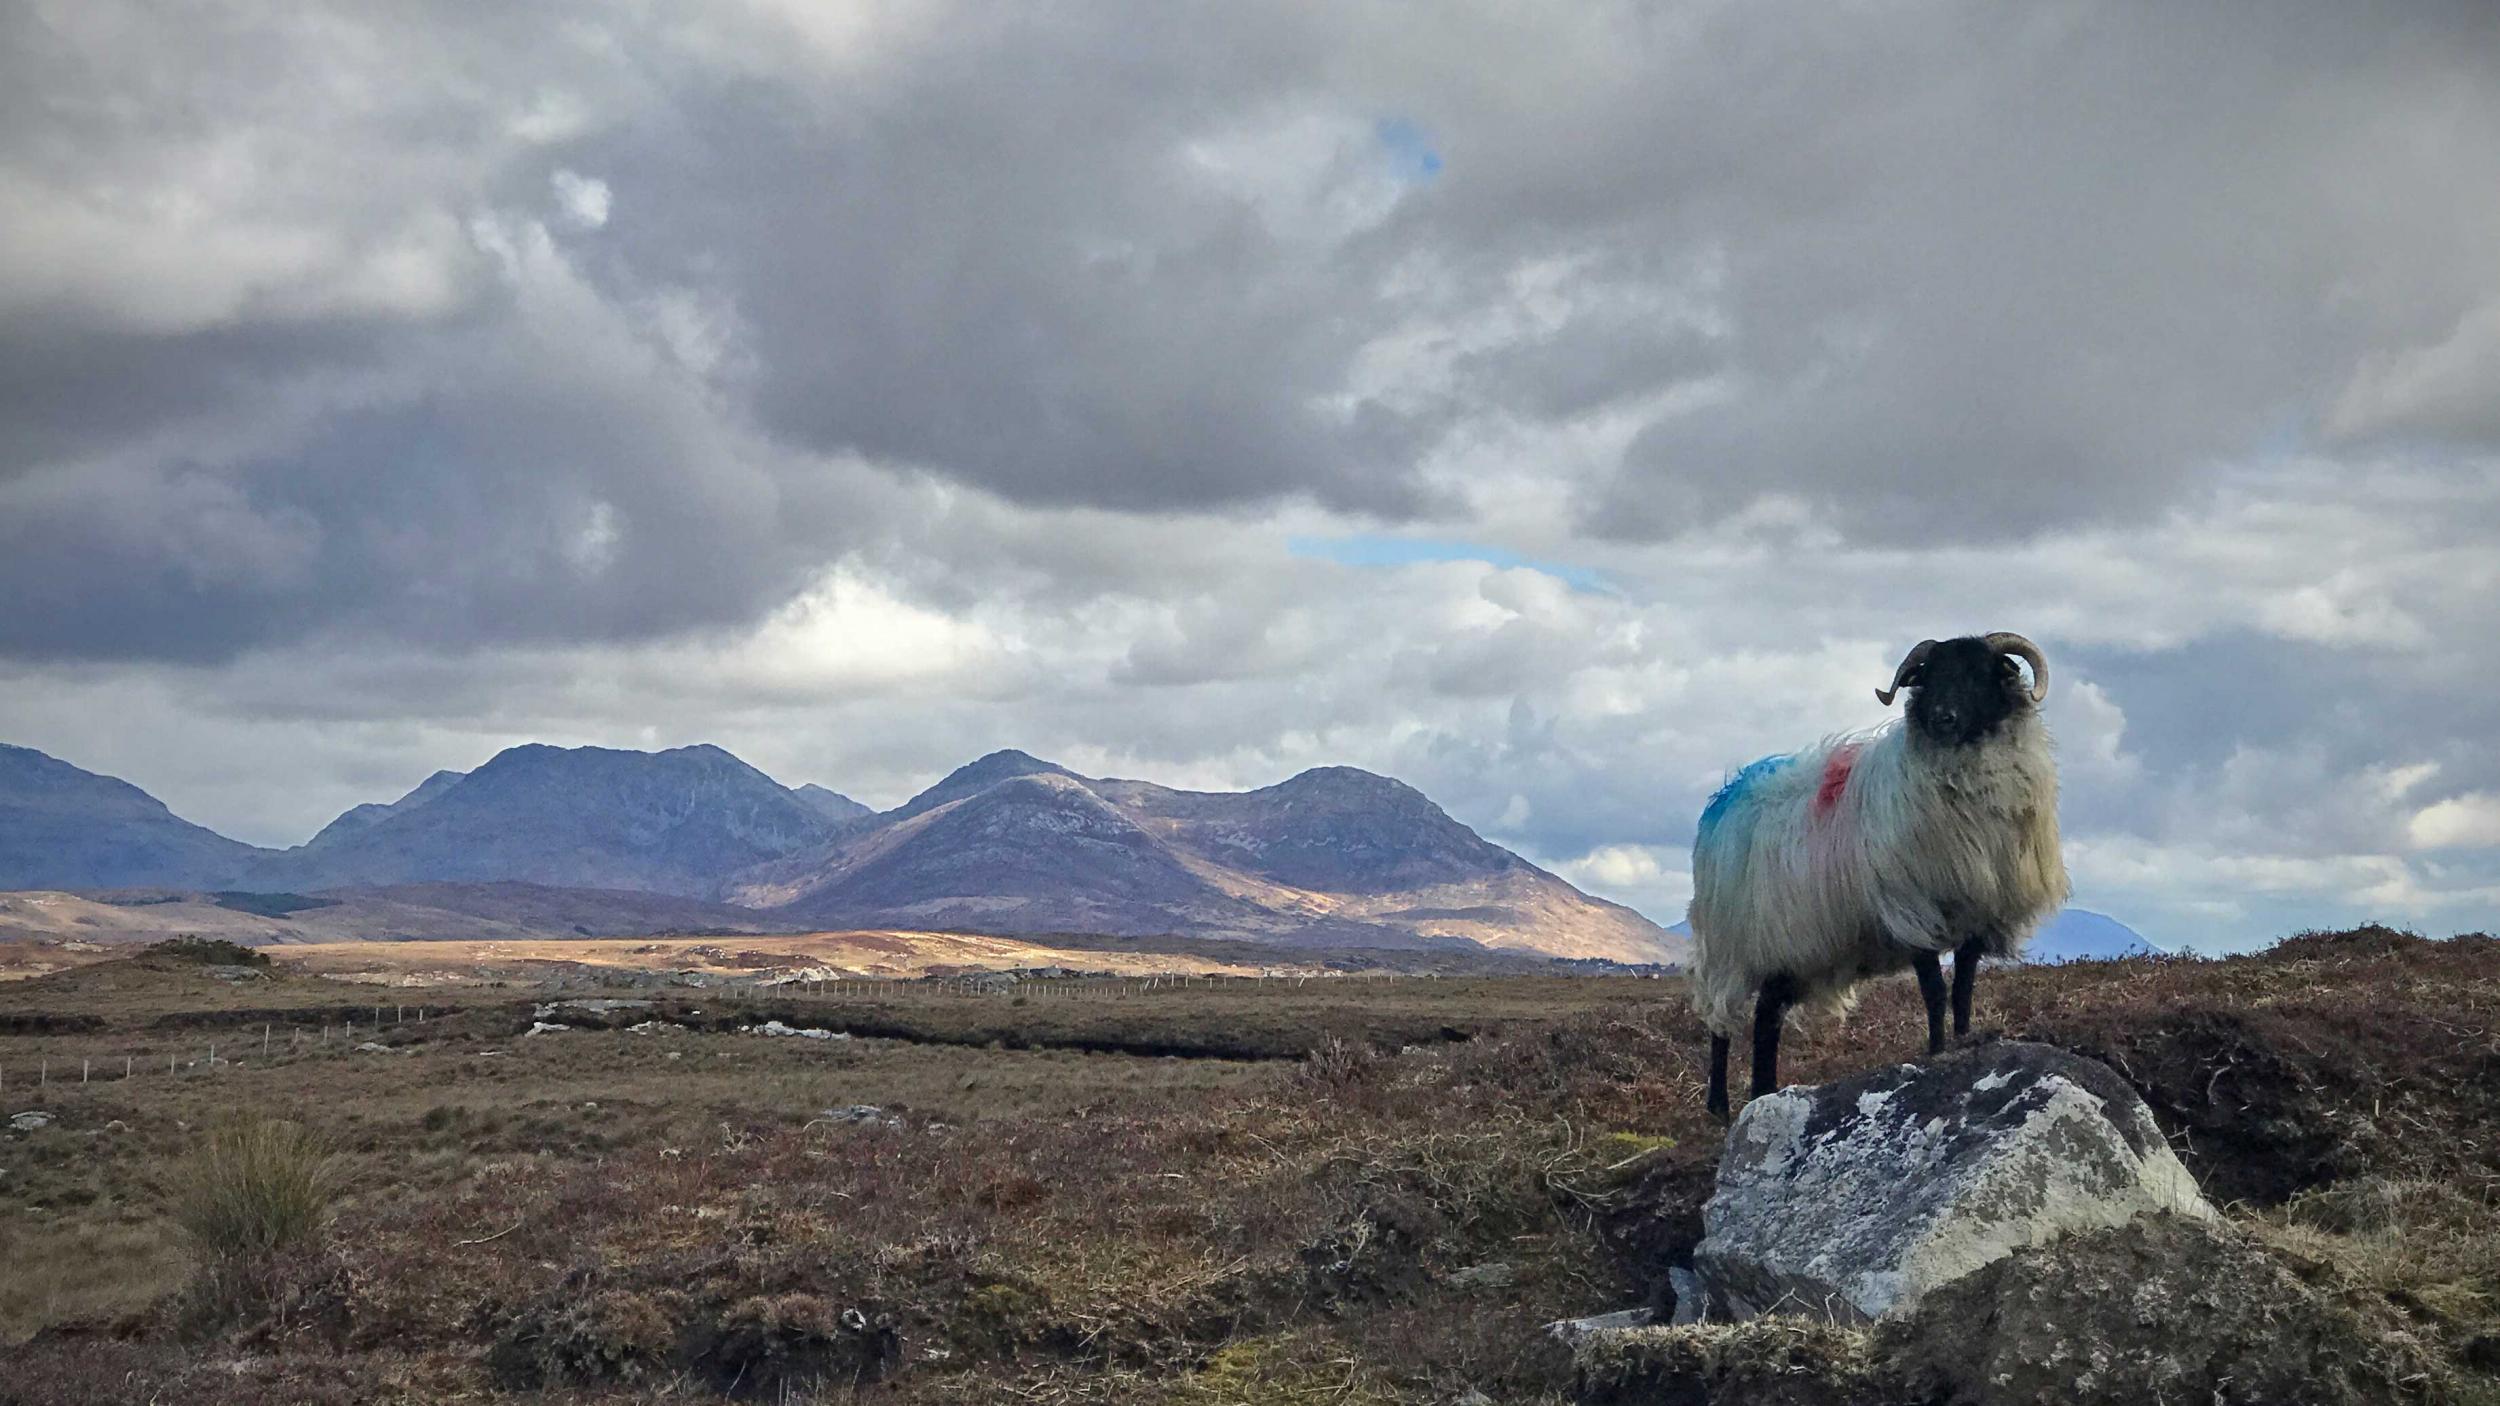 These days, the bog is mainly inhabited by sheep